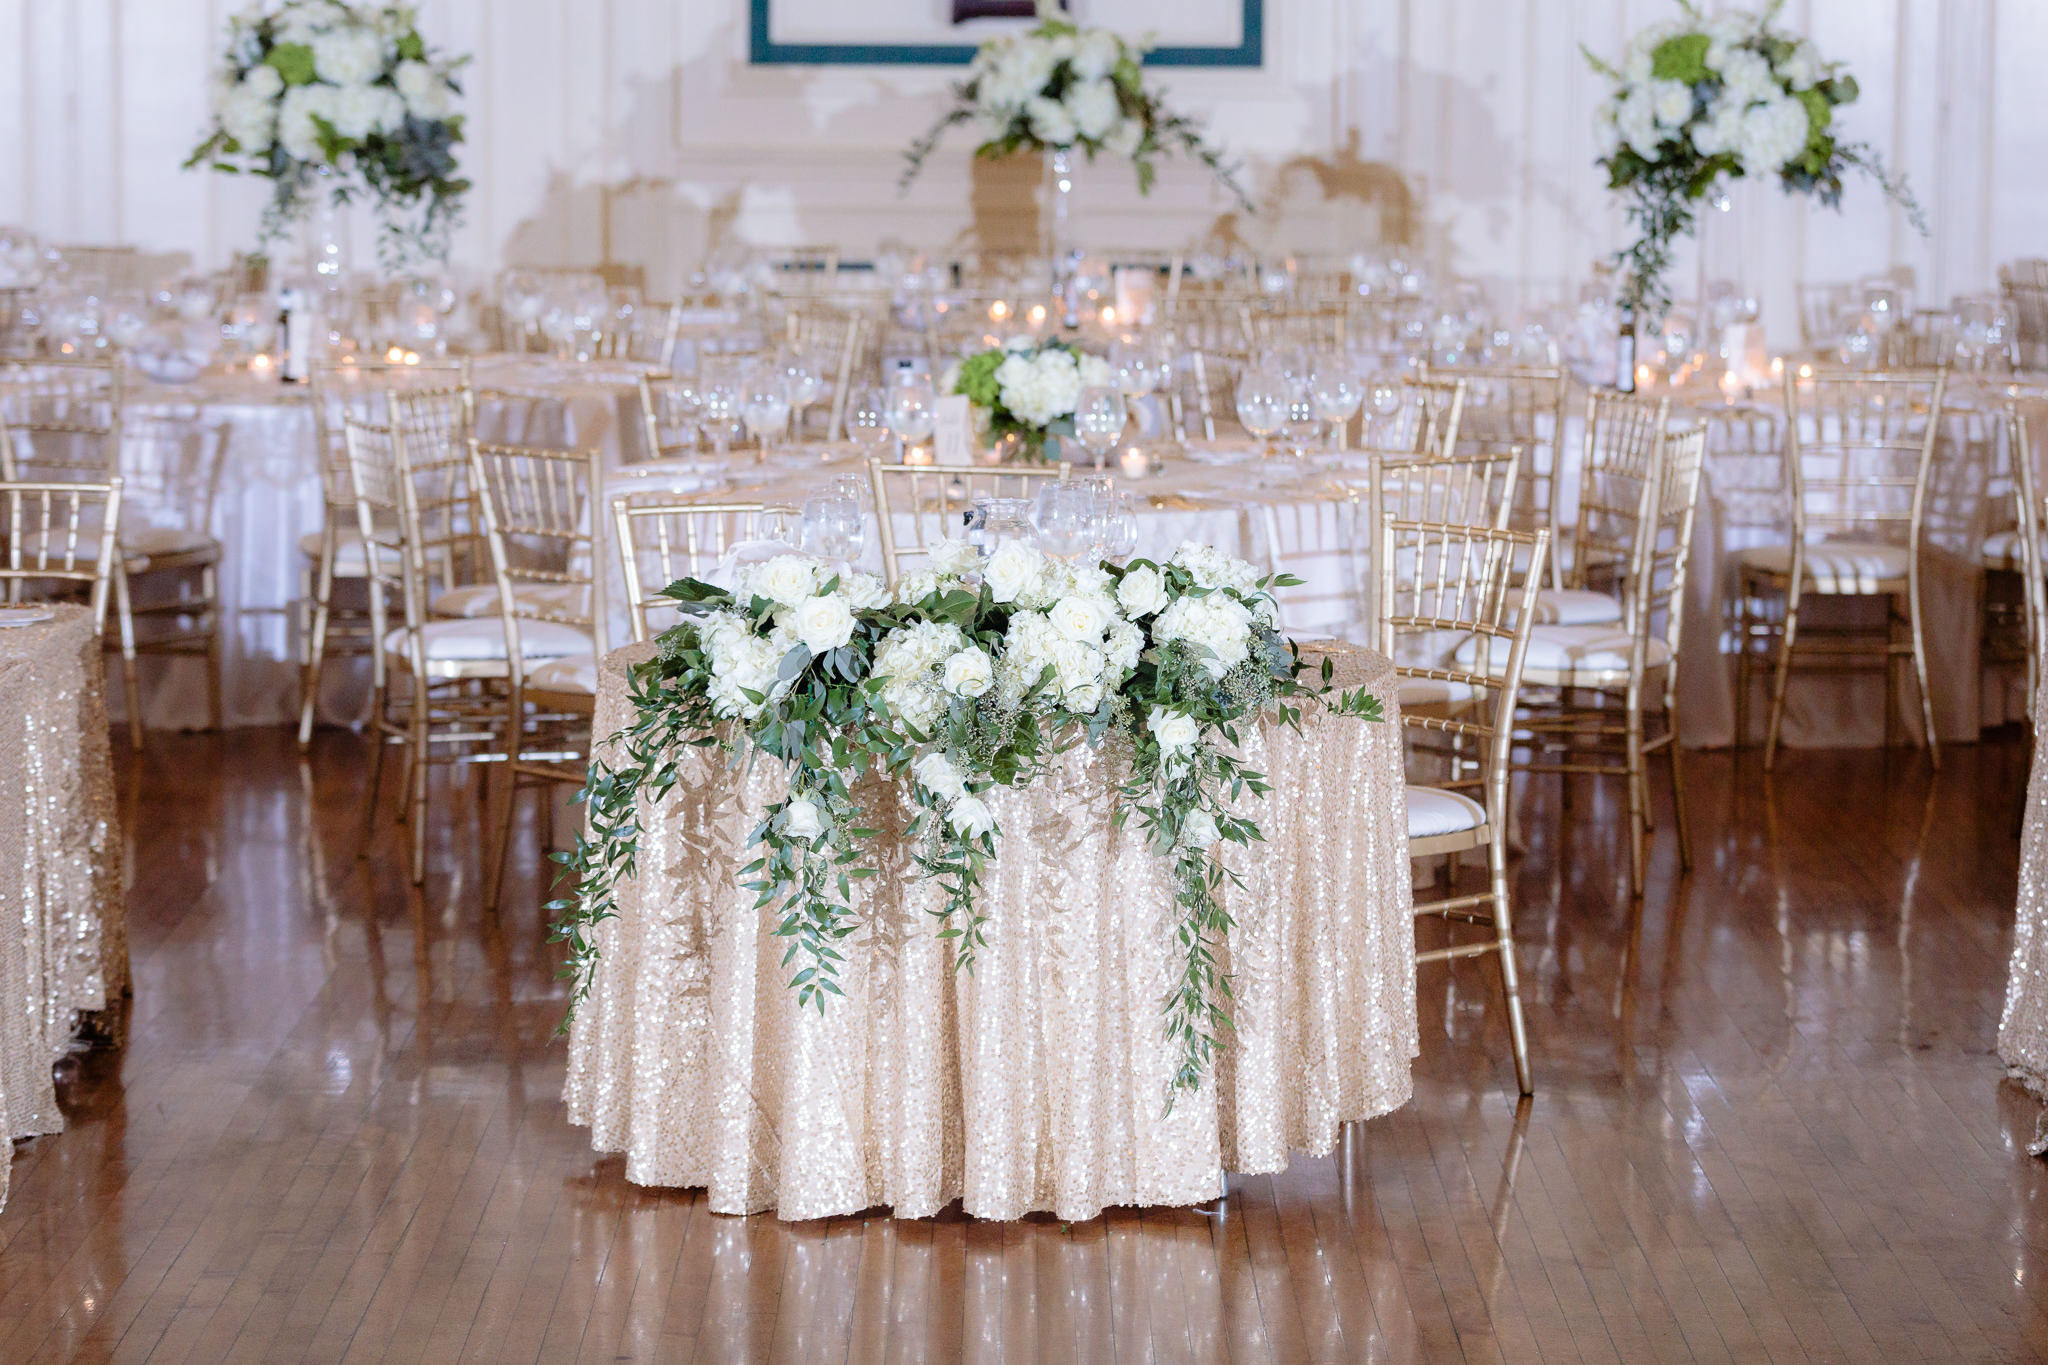 White hydrangeas and greenery drape the sweetheart table at Soldiers & Sailors Memorial Hall